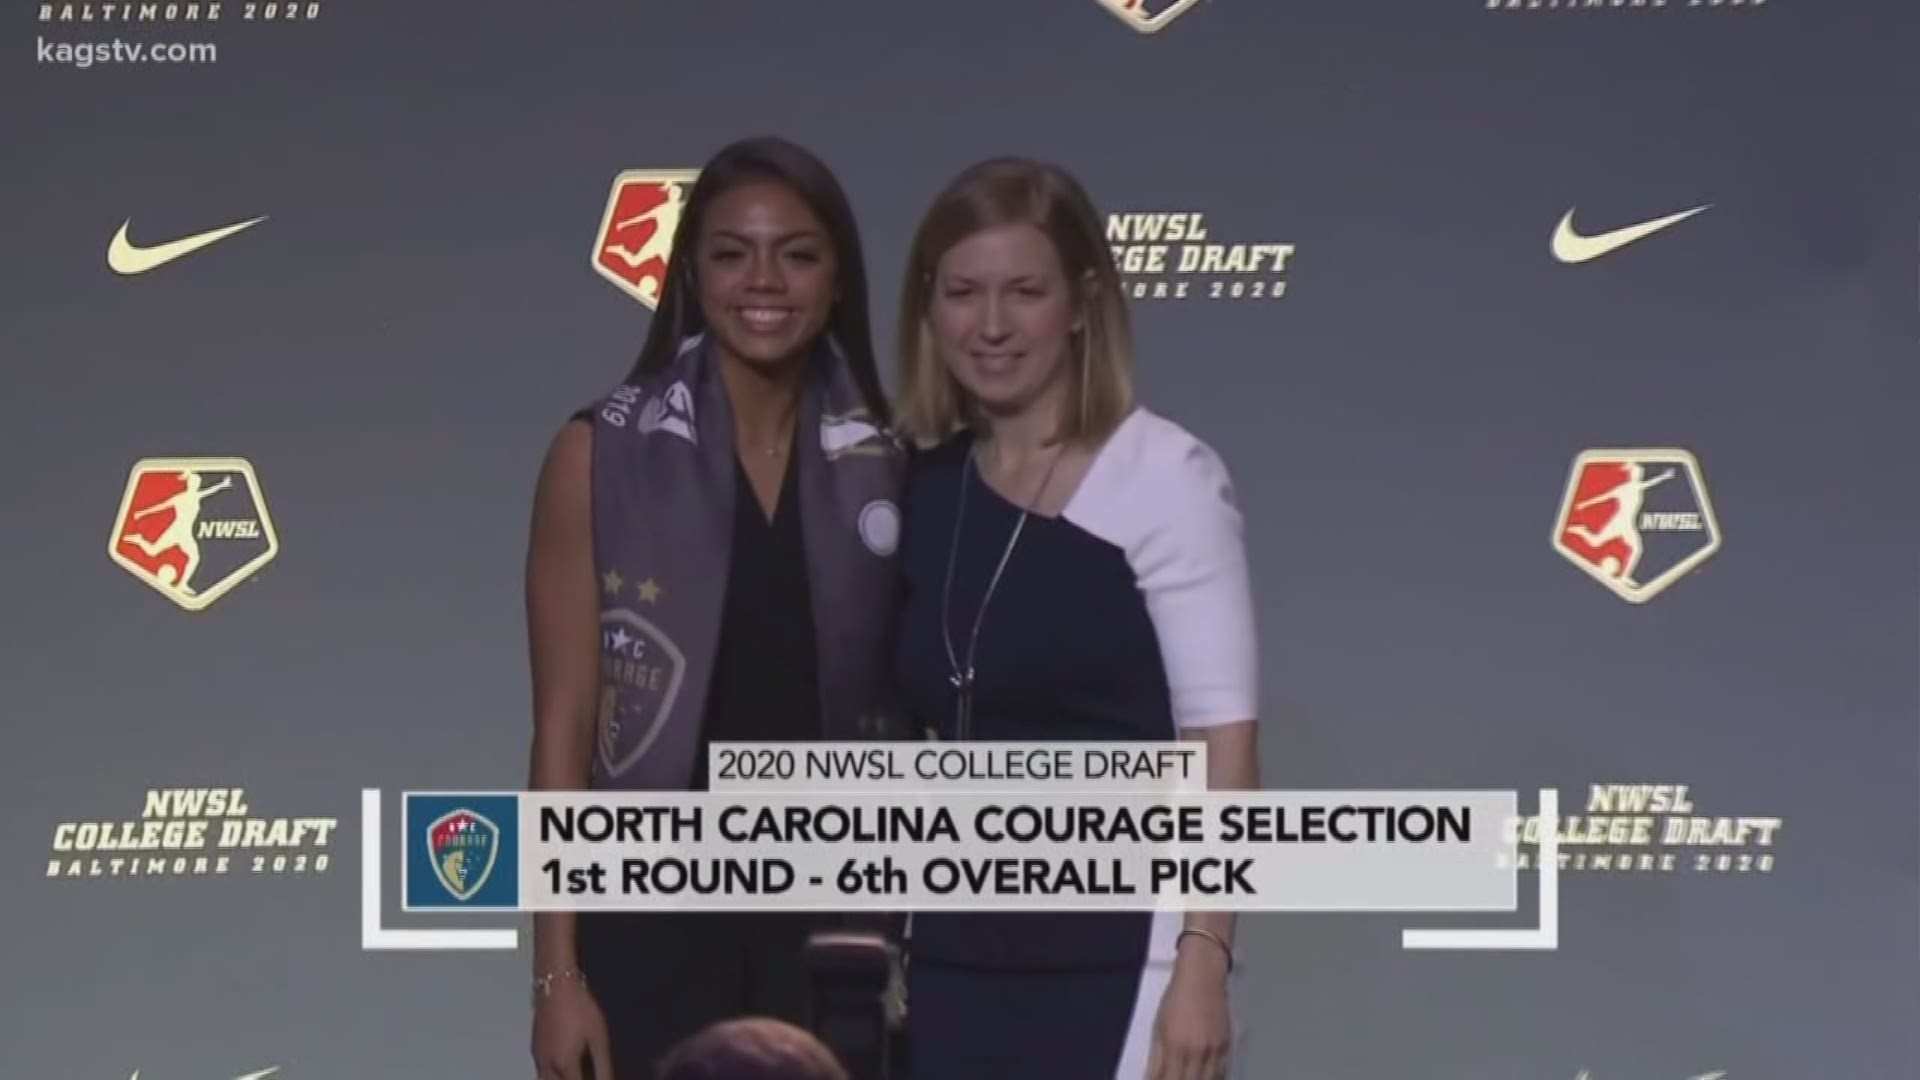 Ally Watt becomes first Aggie to be selected in the first round of the NWSL Draft. Watt, a two-time All American, was taken by the North Carolina Courage.